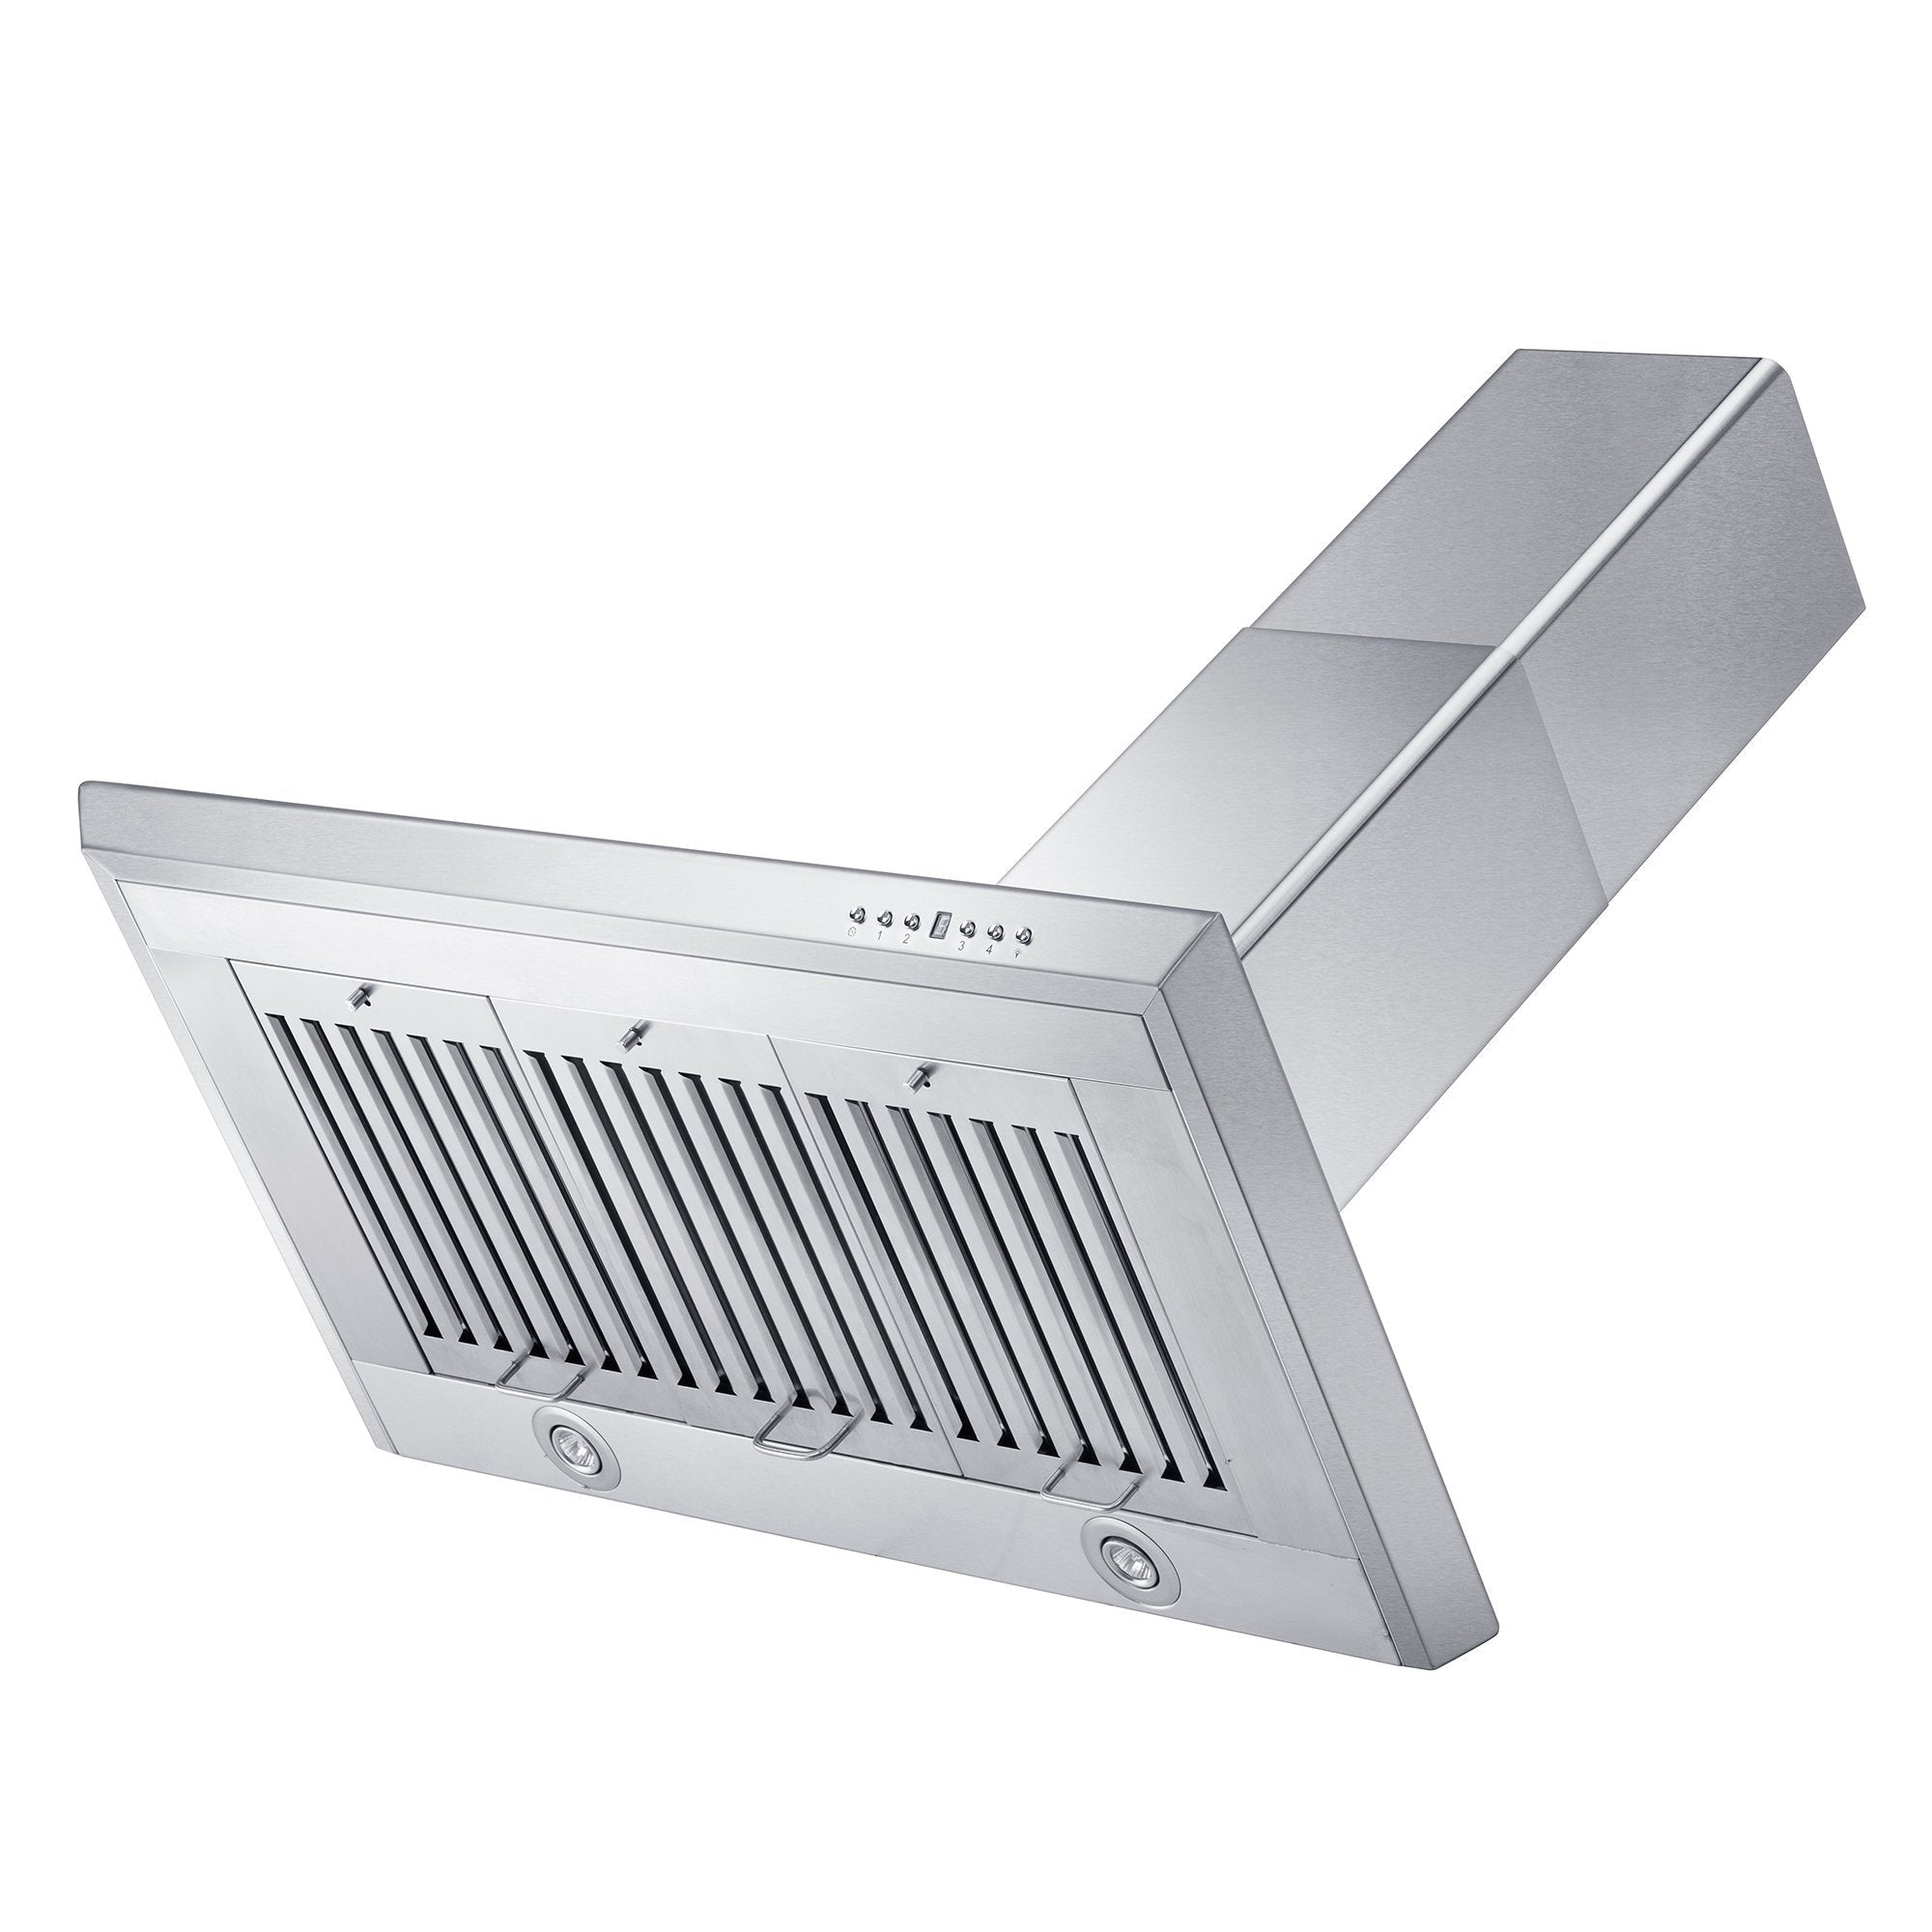 ZLINE 36 in. Convertible Vent Wall Mount Range Hood in Stainless Steel (KF-36) angled under.